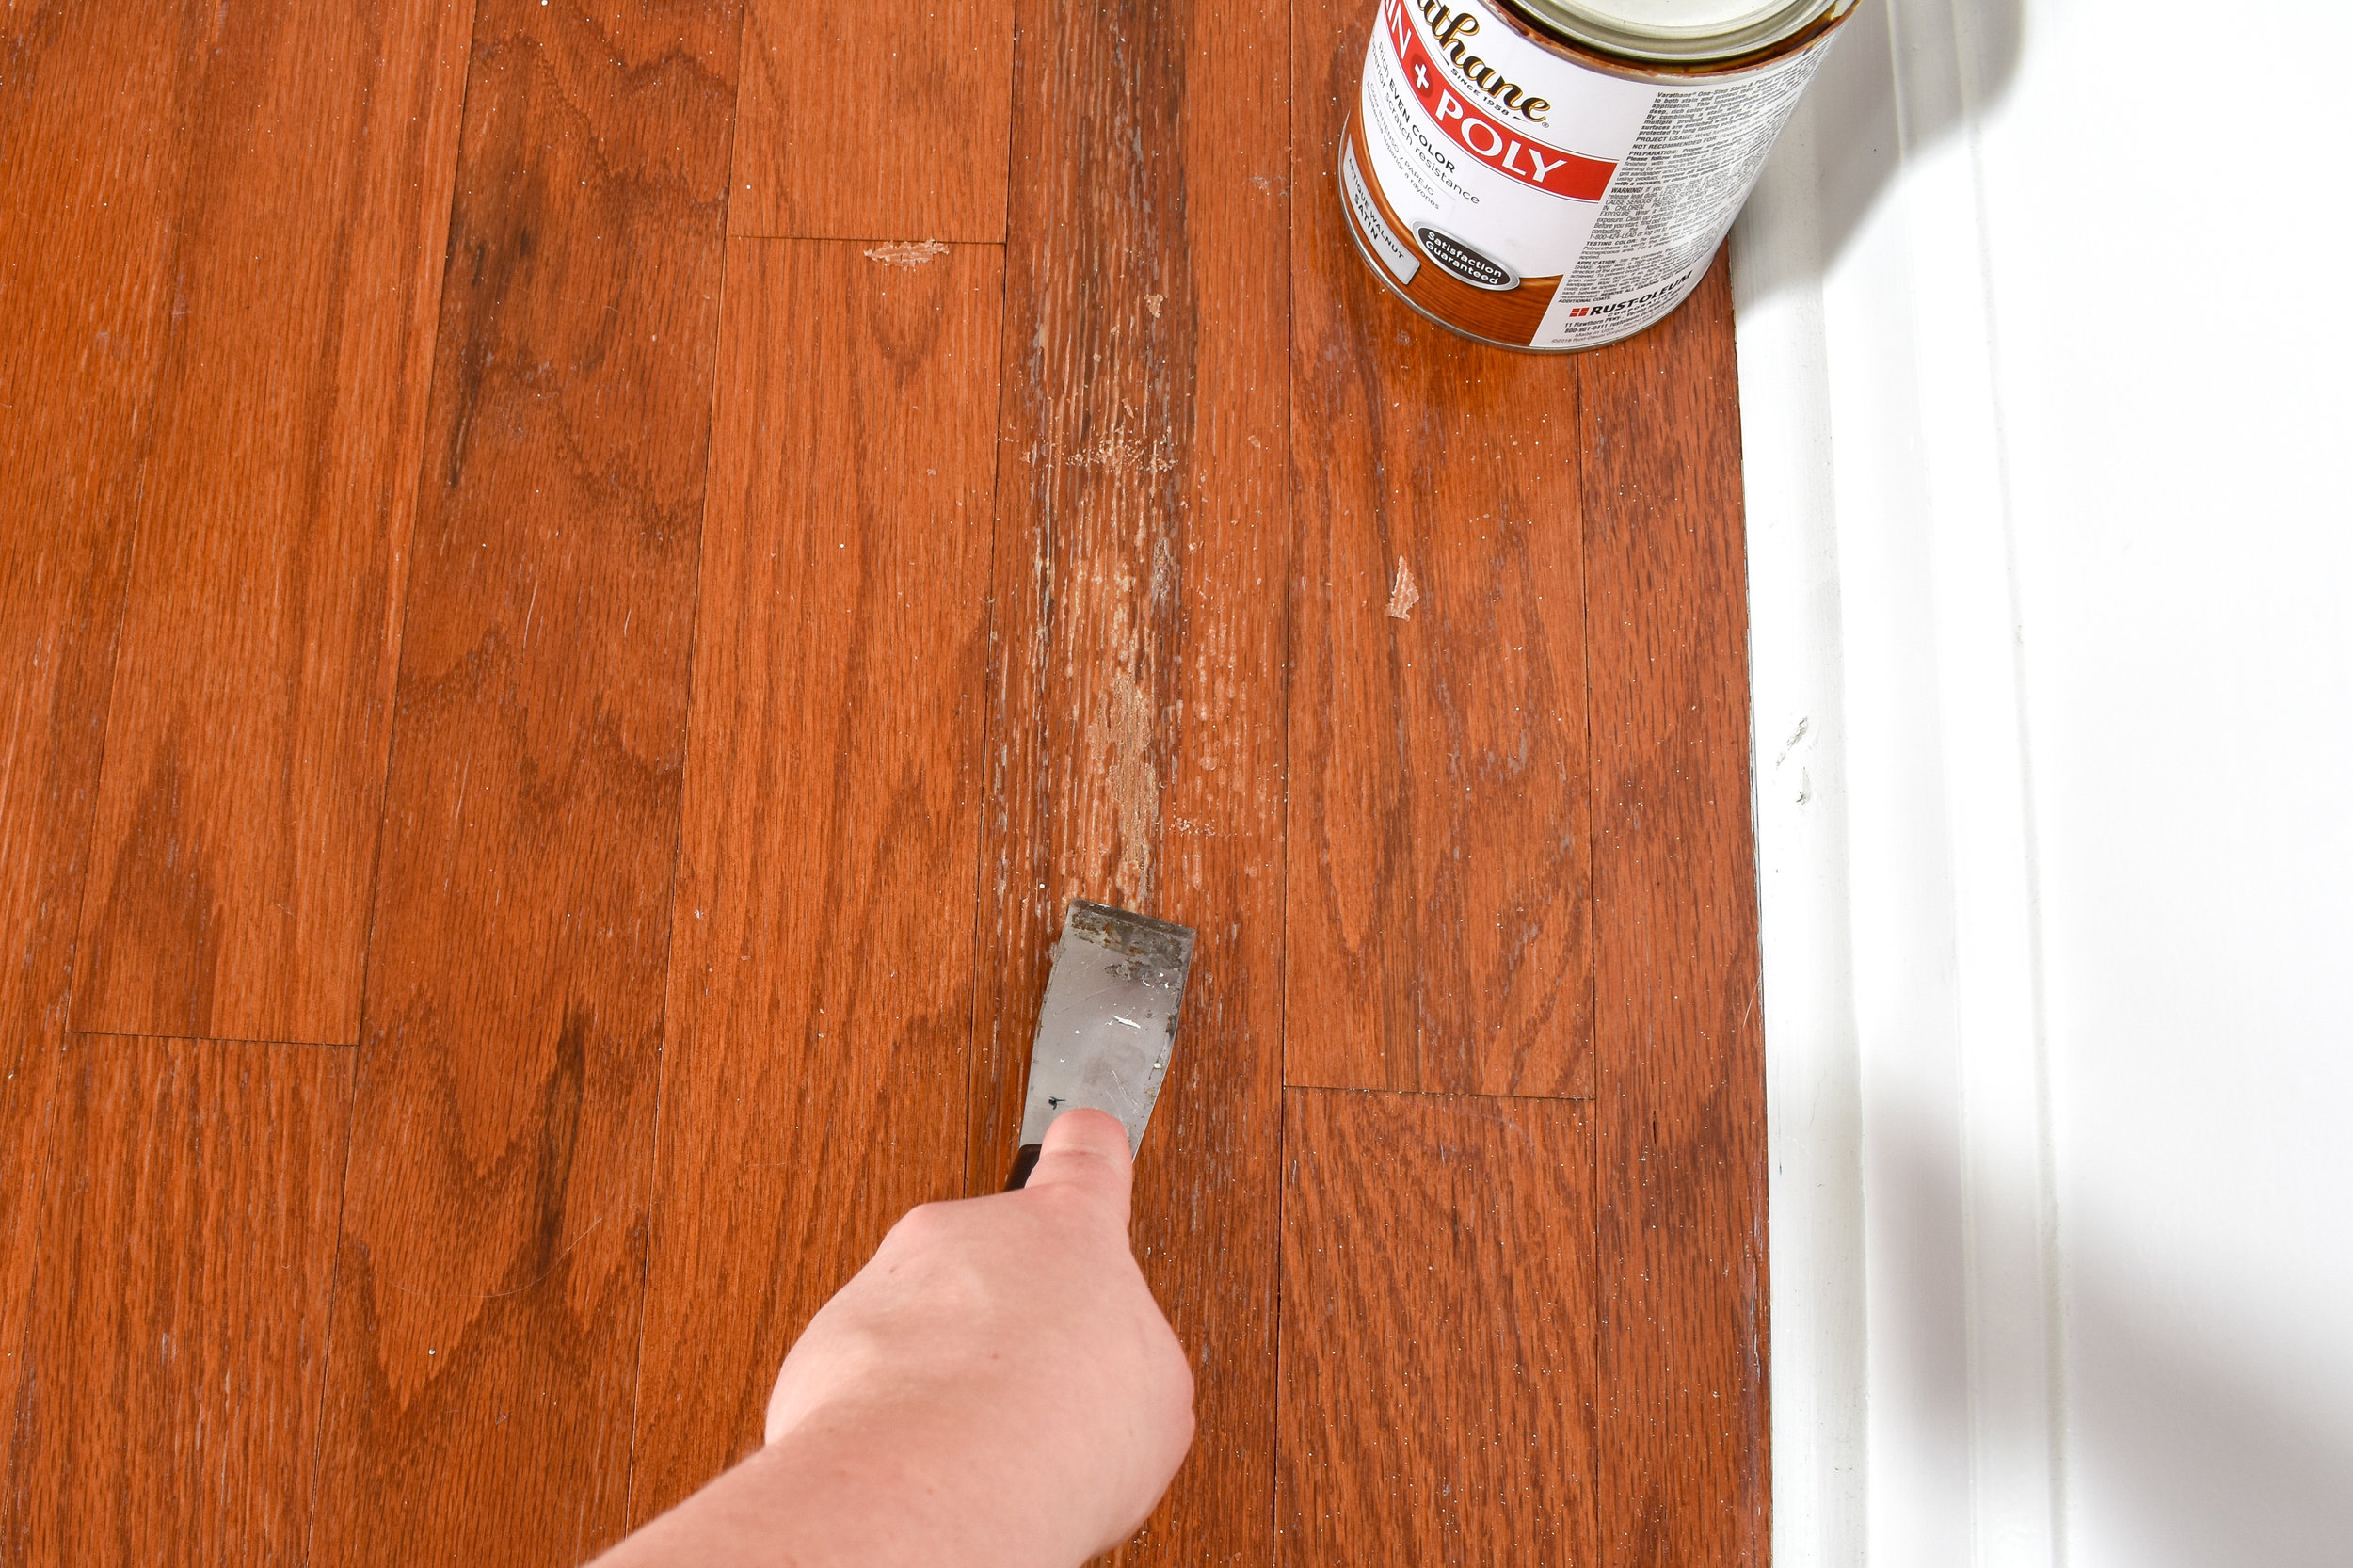 How To Make Old Hardwood Floors Shine, How To Repair Scratches On Prefinished Hardwood Flooring